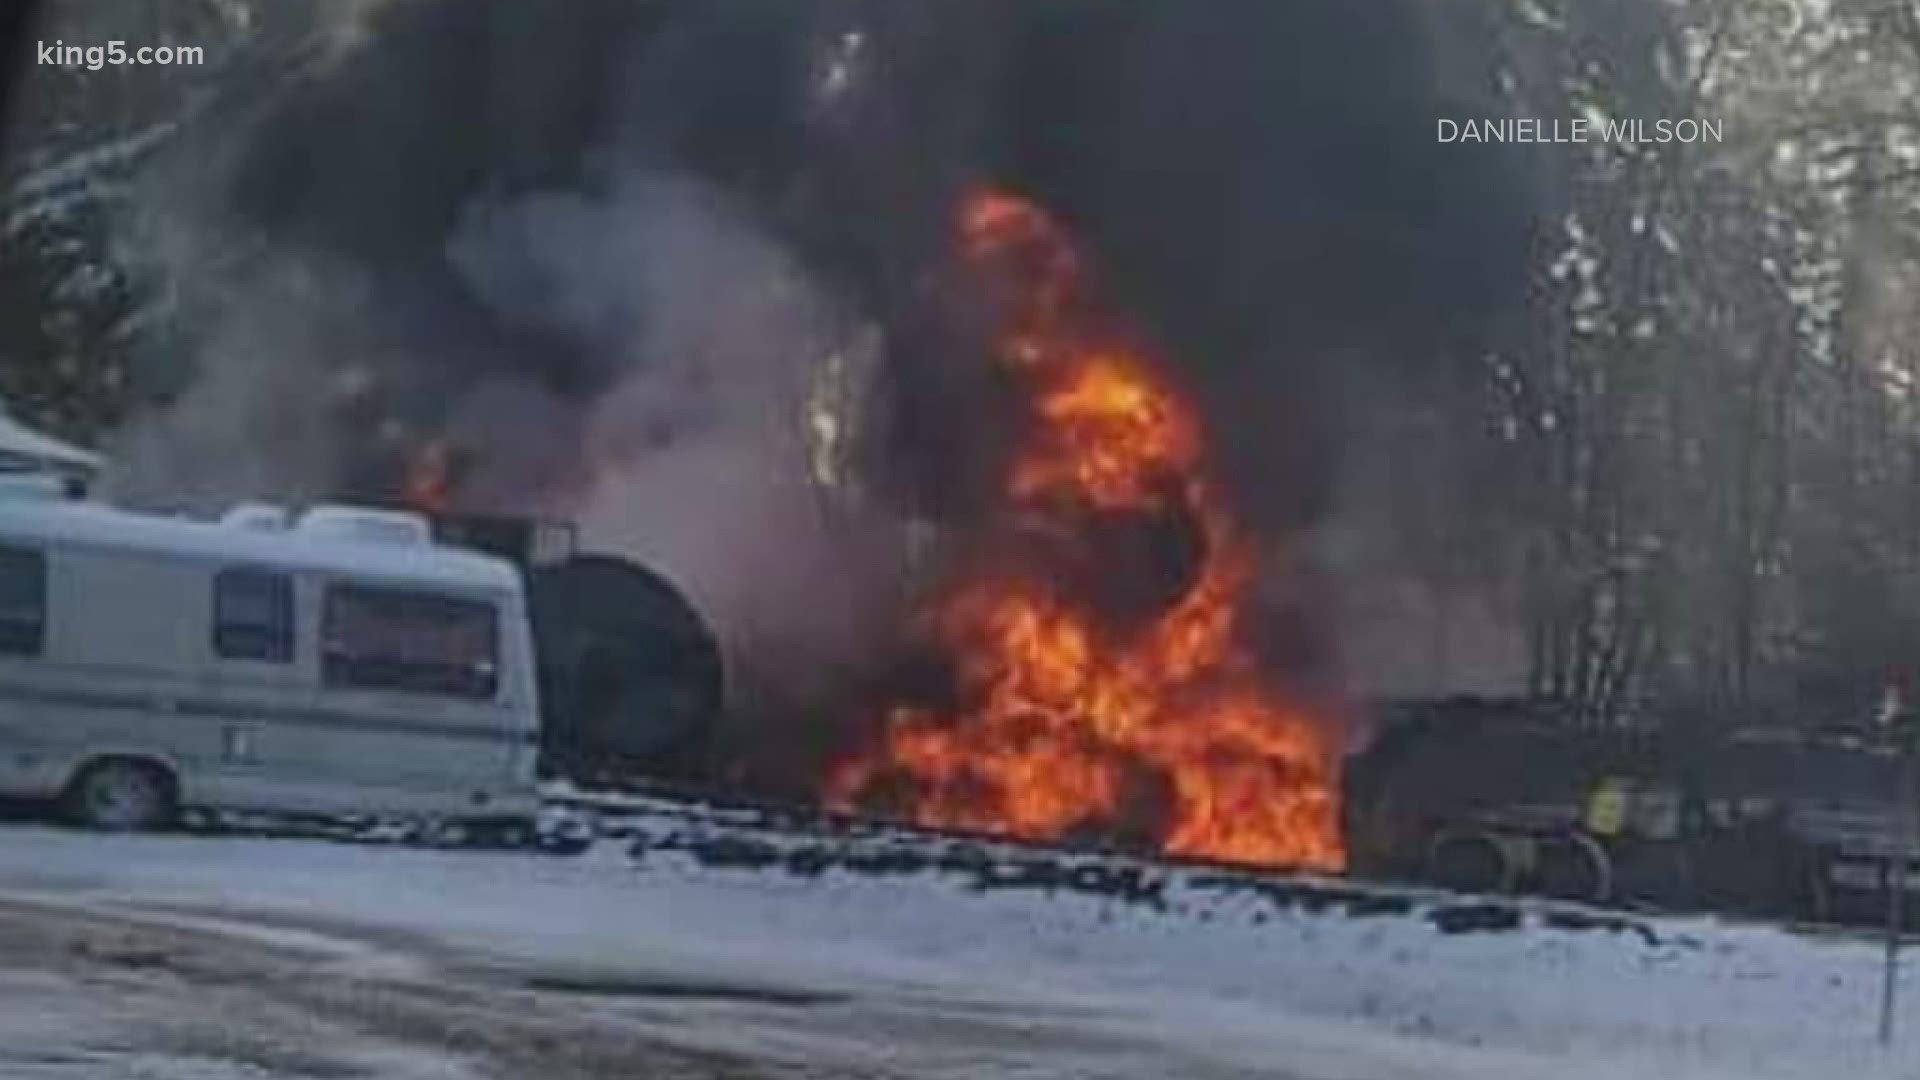 Six tanker train cars derailed in the Custer area of Whatcom County and caught fire Tuesday. Evacuations in the neighborhood are now lifted. No injuries reported.